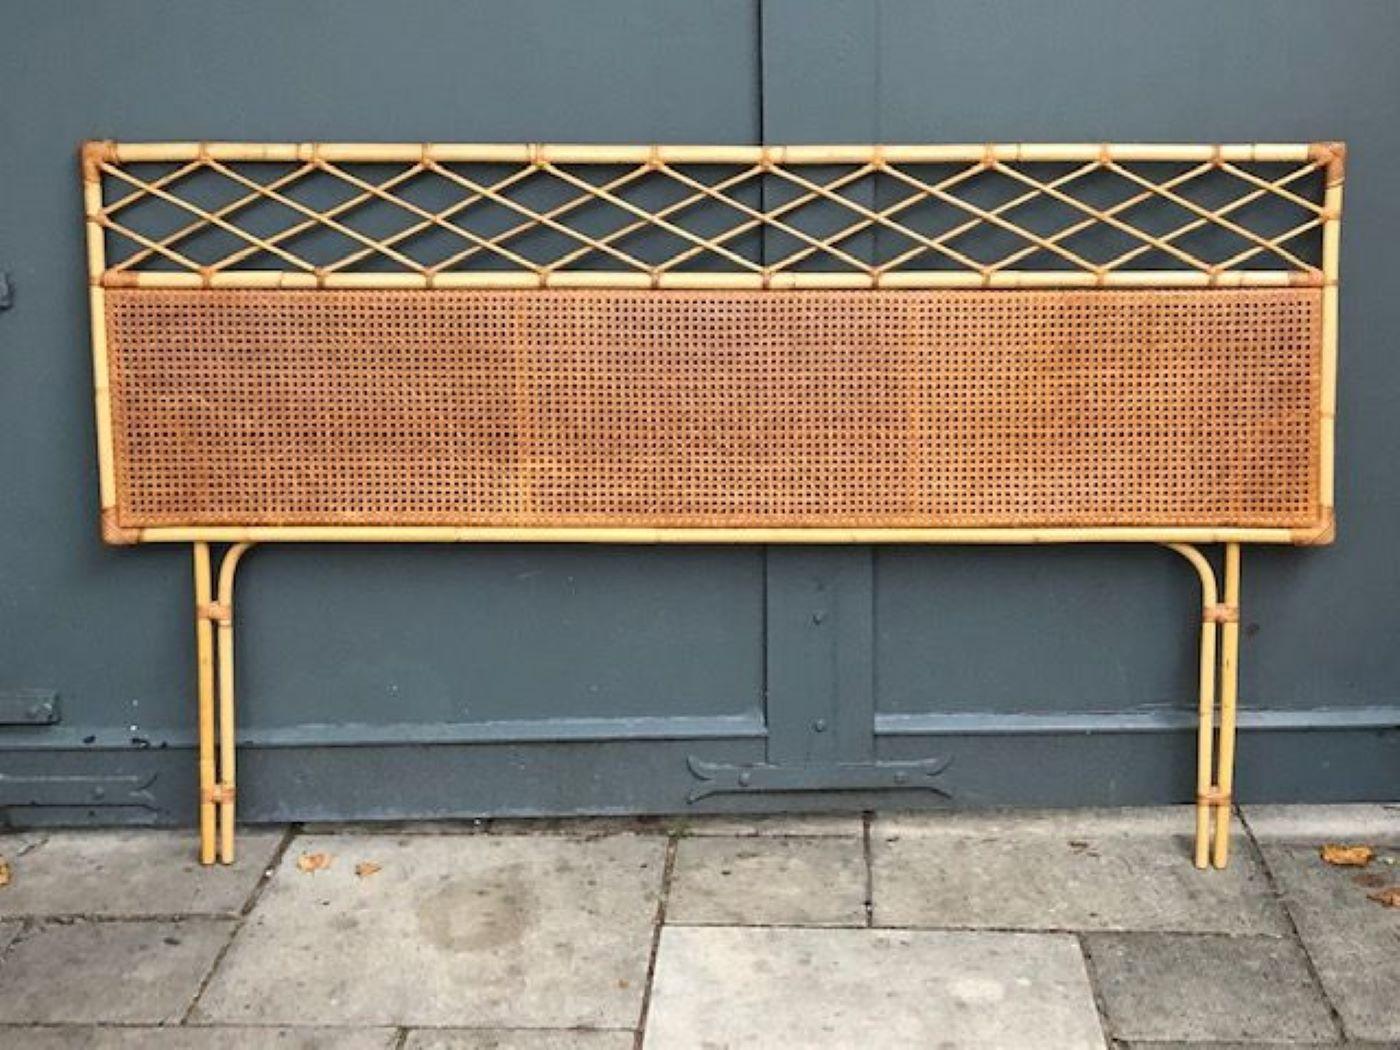 Mid-Century Modern rattan / cane super king headboard (6’ft), Italian, 1970s

Mid-Century Modern rattan / cane rectangular shaped headboard, with a large French cane matting panel, below a woven rattan diamond pattern, on cane legs. To fit a 6ft